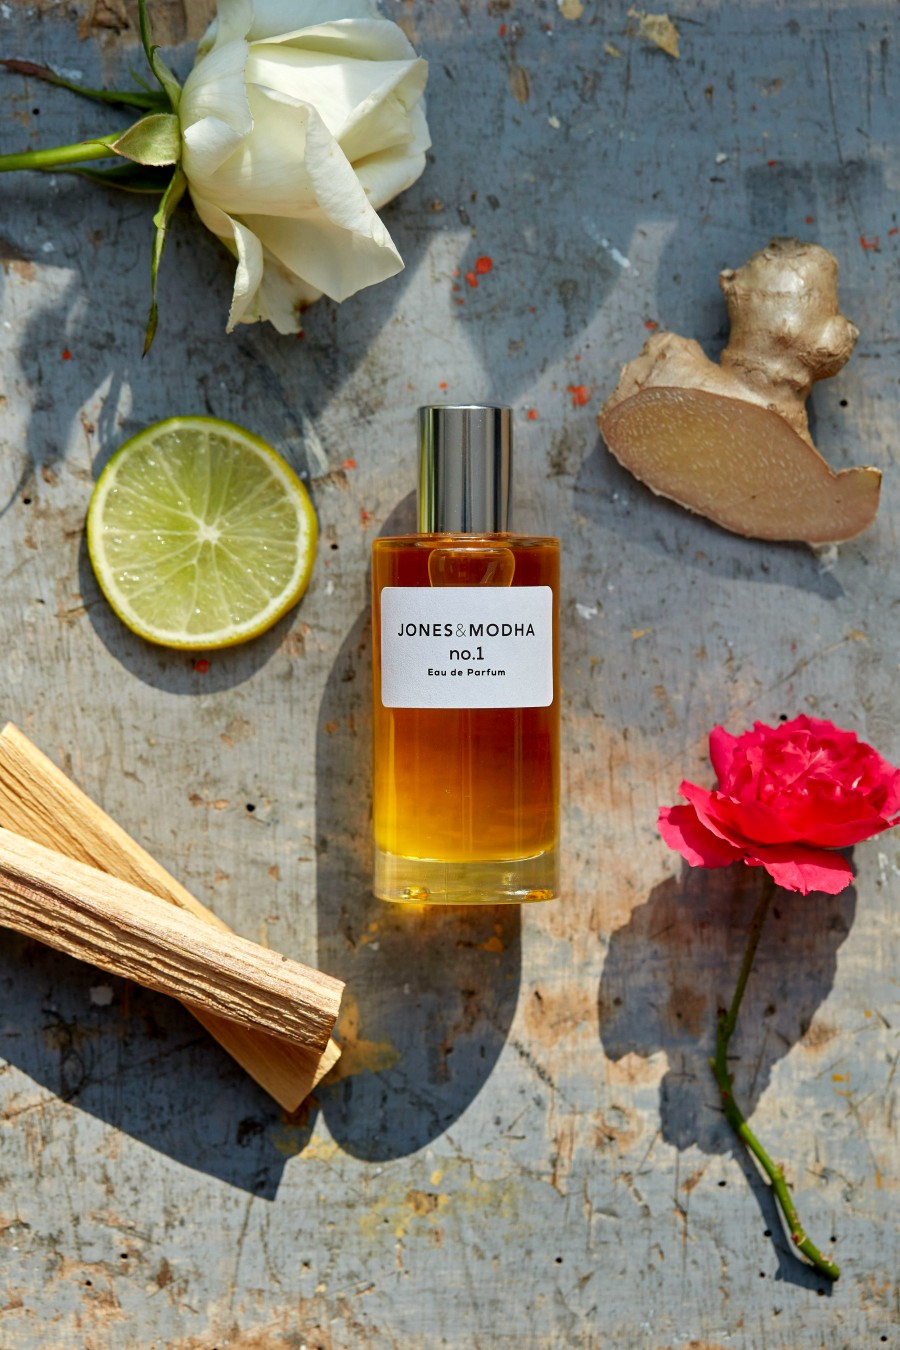 where to buy sustainable (vegan) perfumes or cologne